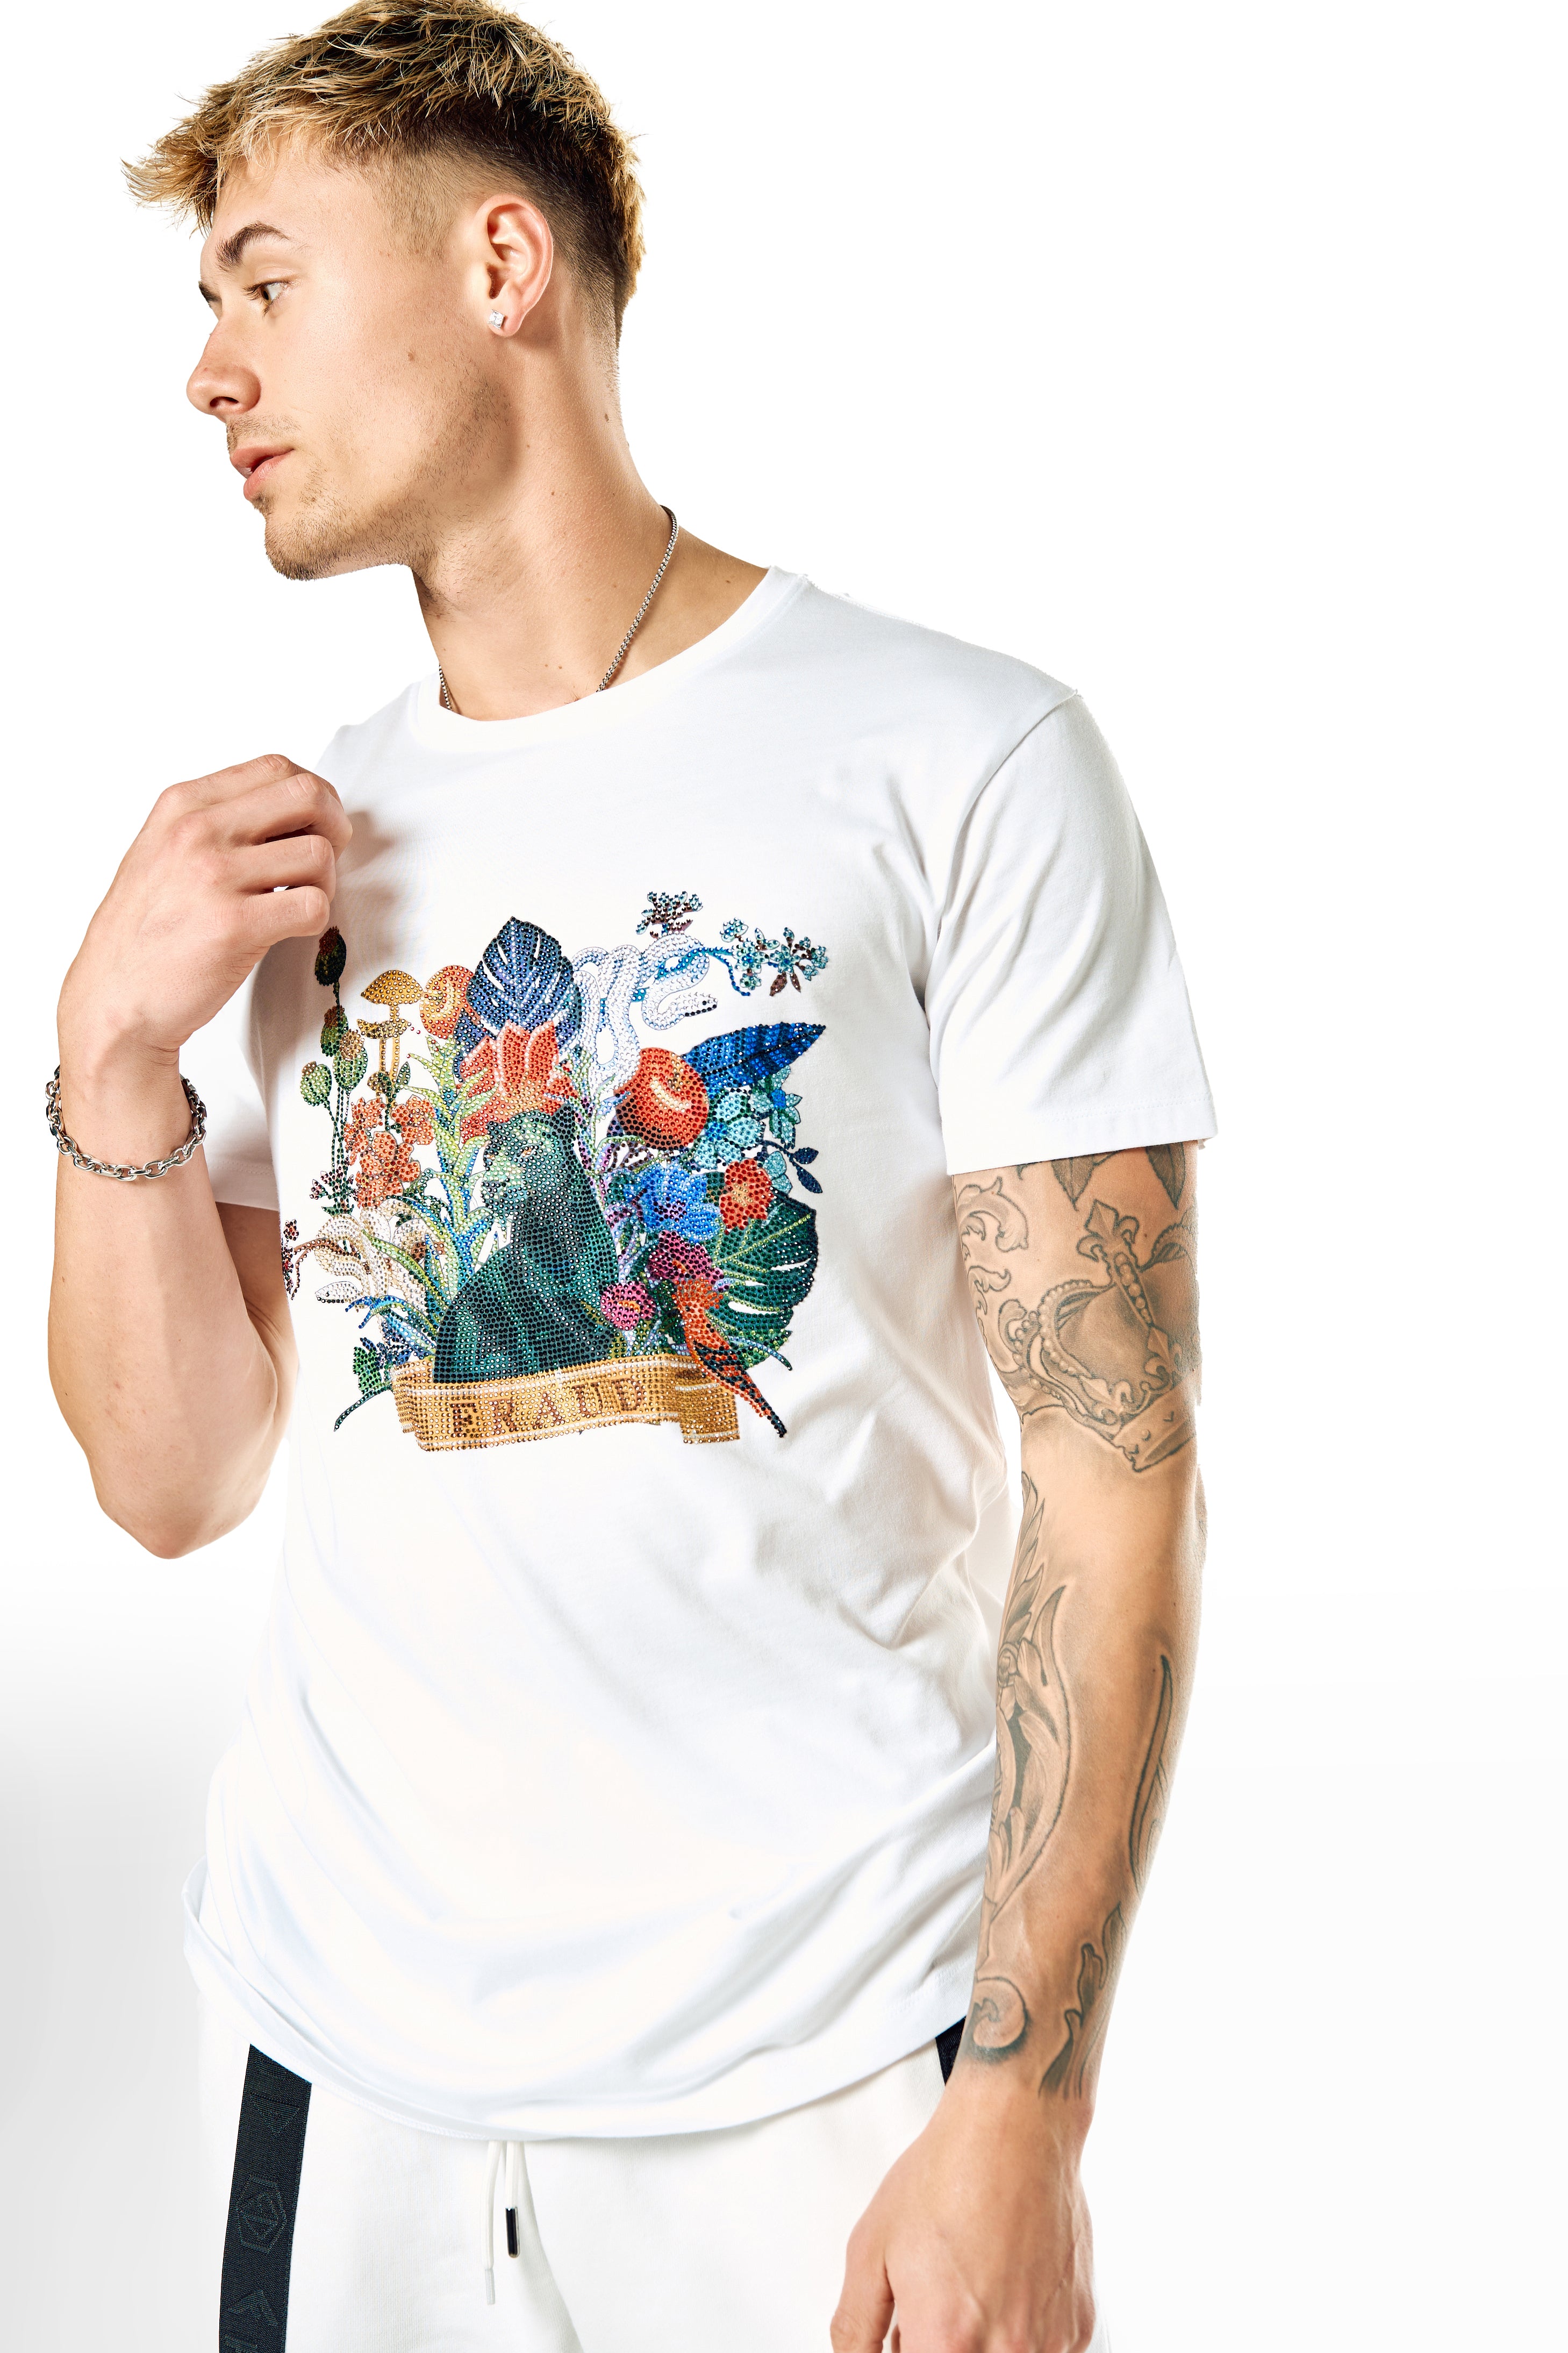 white t-shirt with crystals, panter